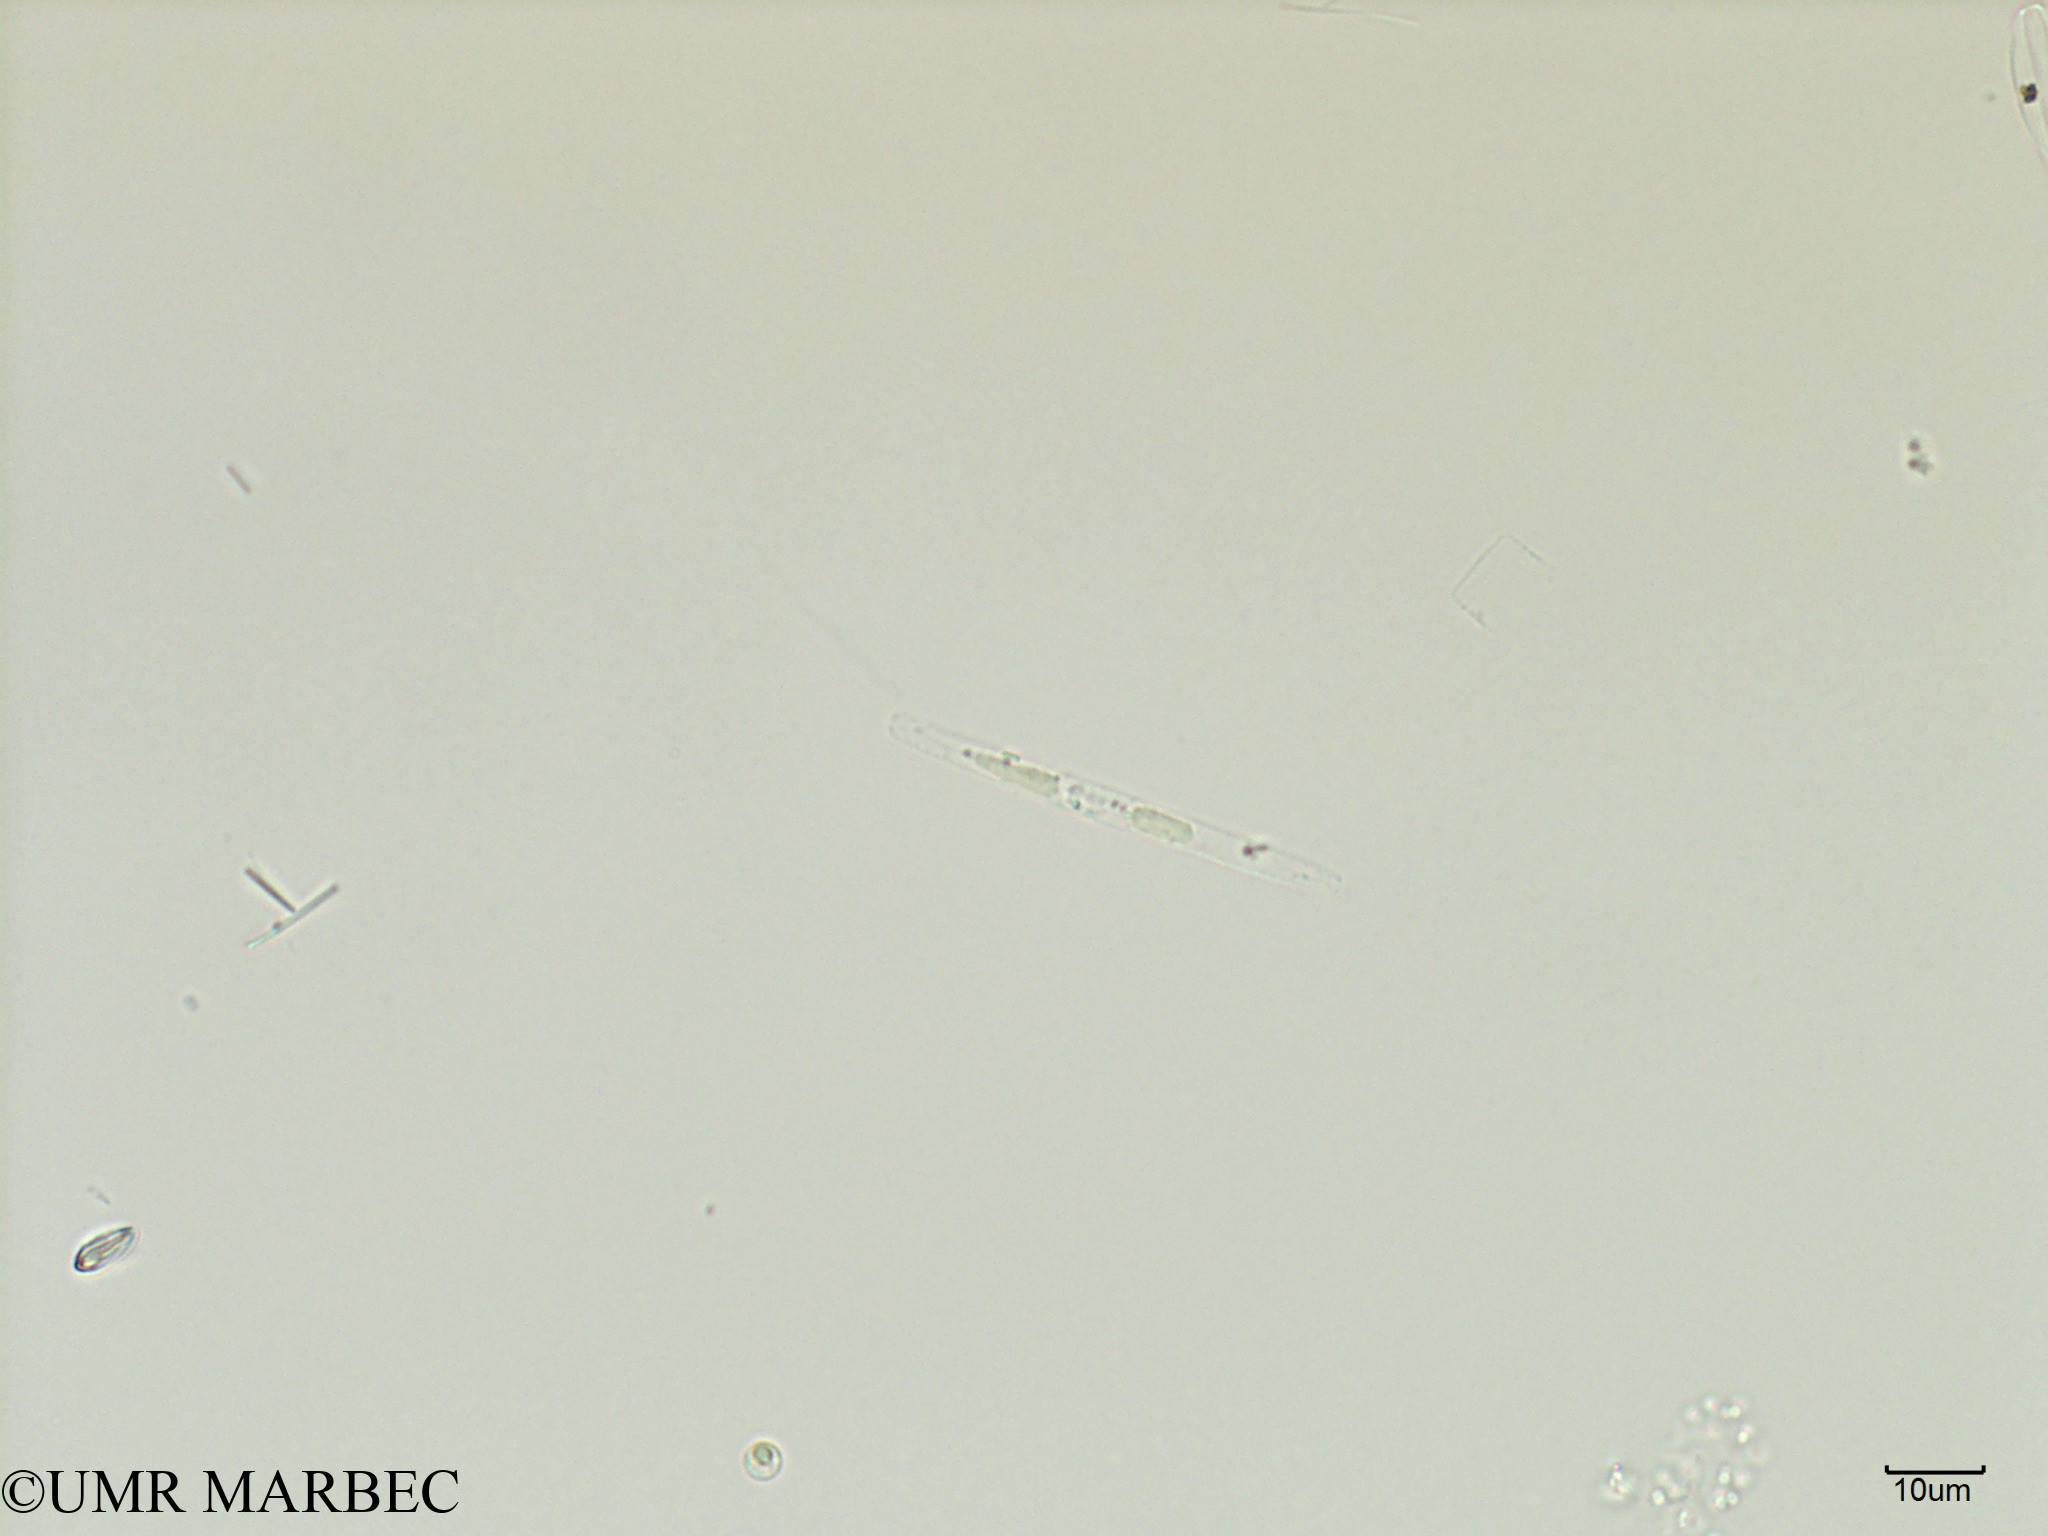 phyto/Scattered_Islands/iles_glorieuses/SIREME May 2016/Pennée spp 3-5x15-40µm (Pennée SIREME-Glorieuses2016-GLO2F-101116-pennée moy)(copy).jpg